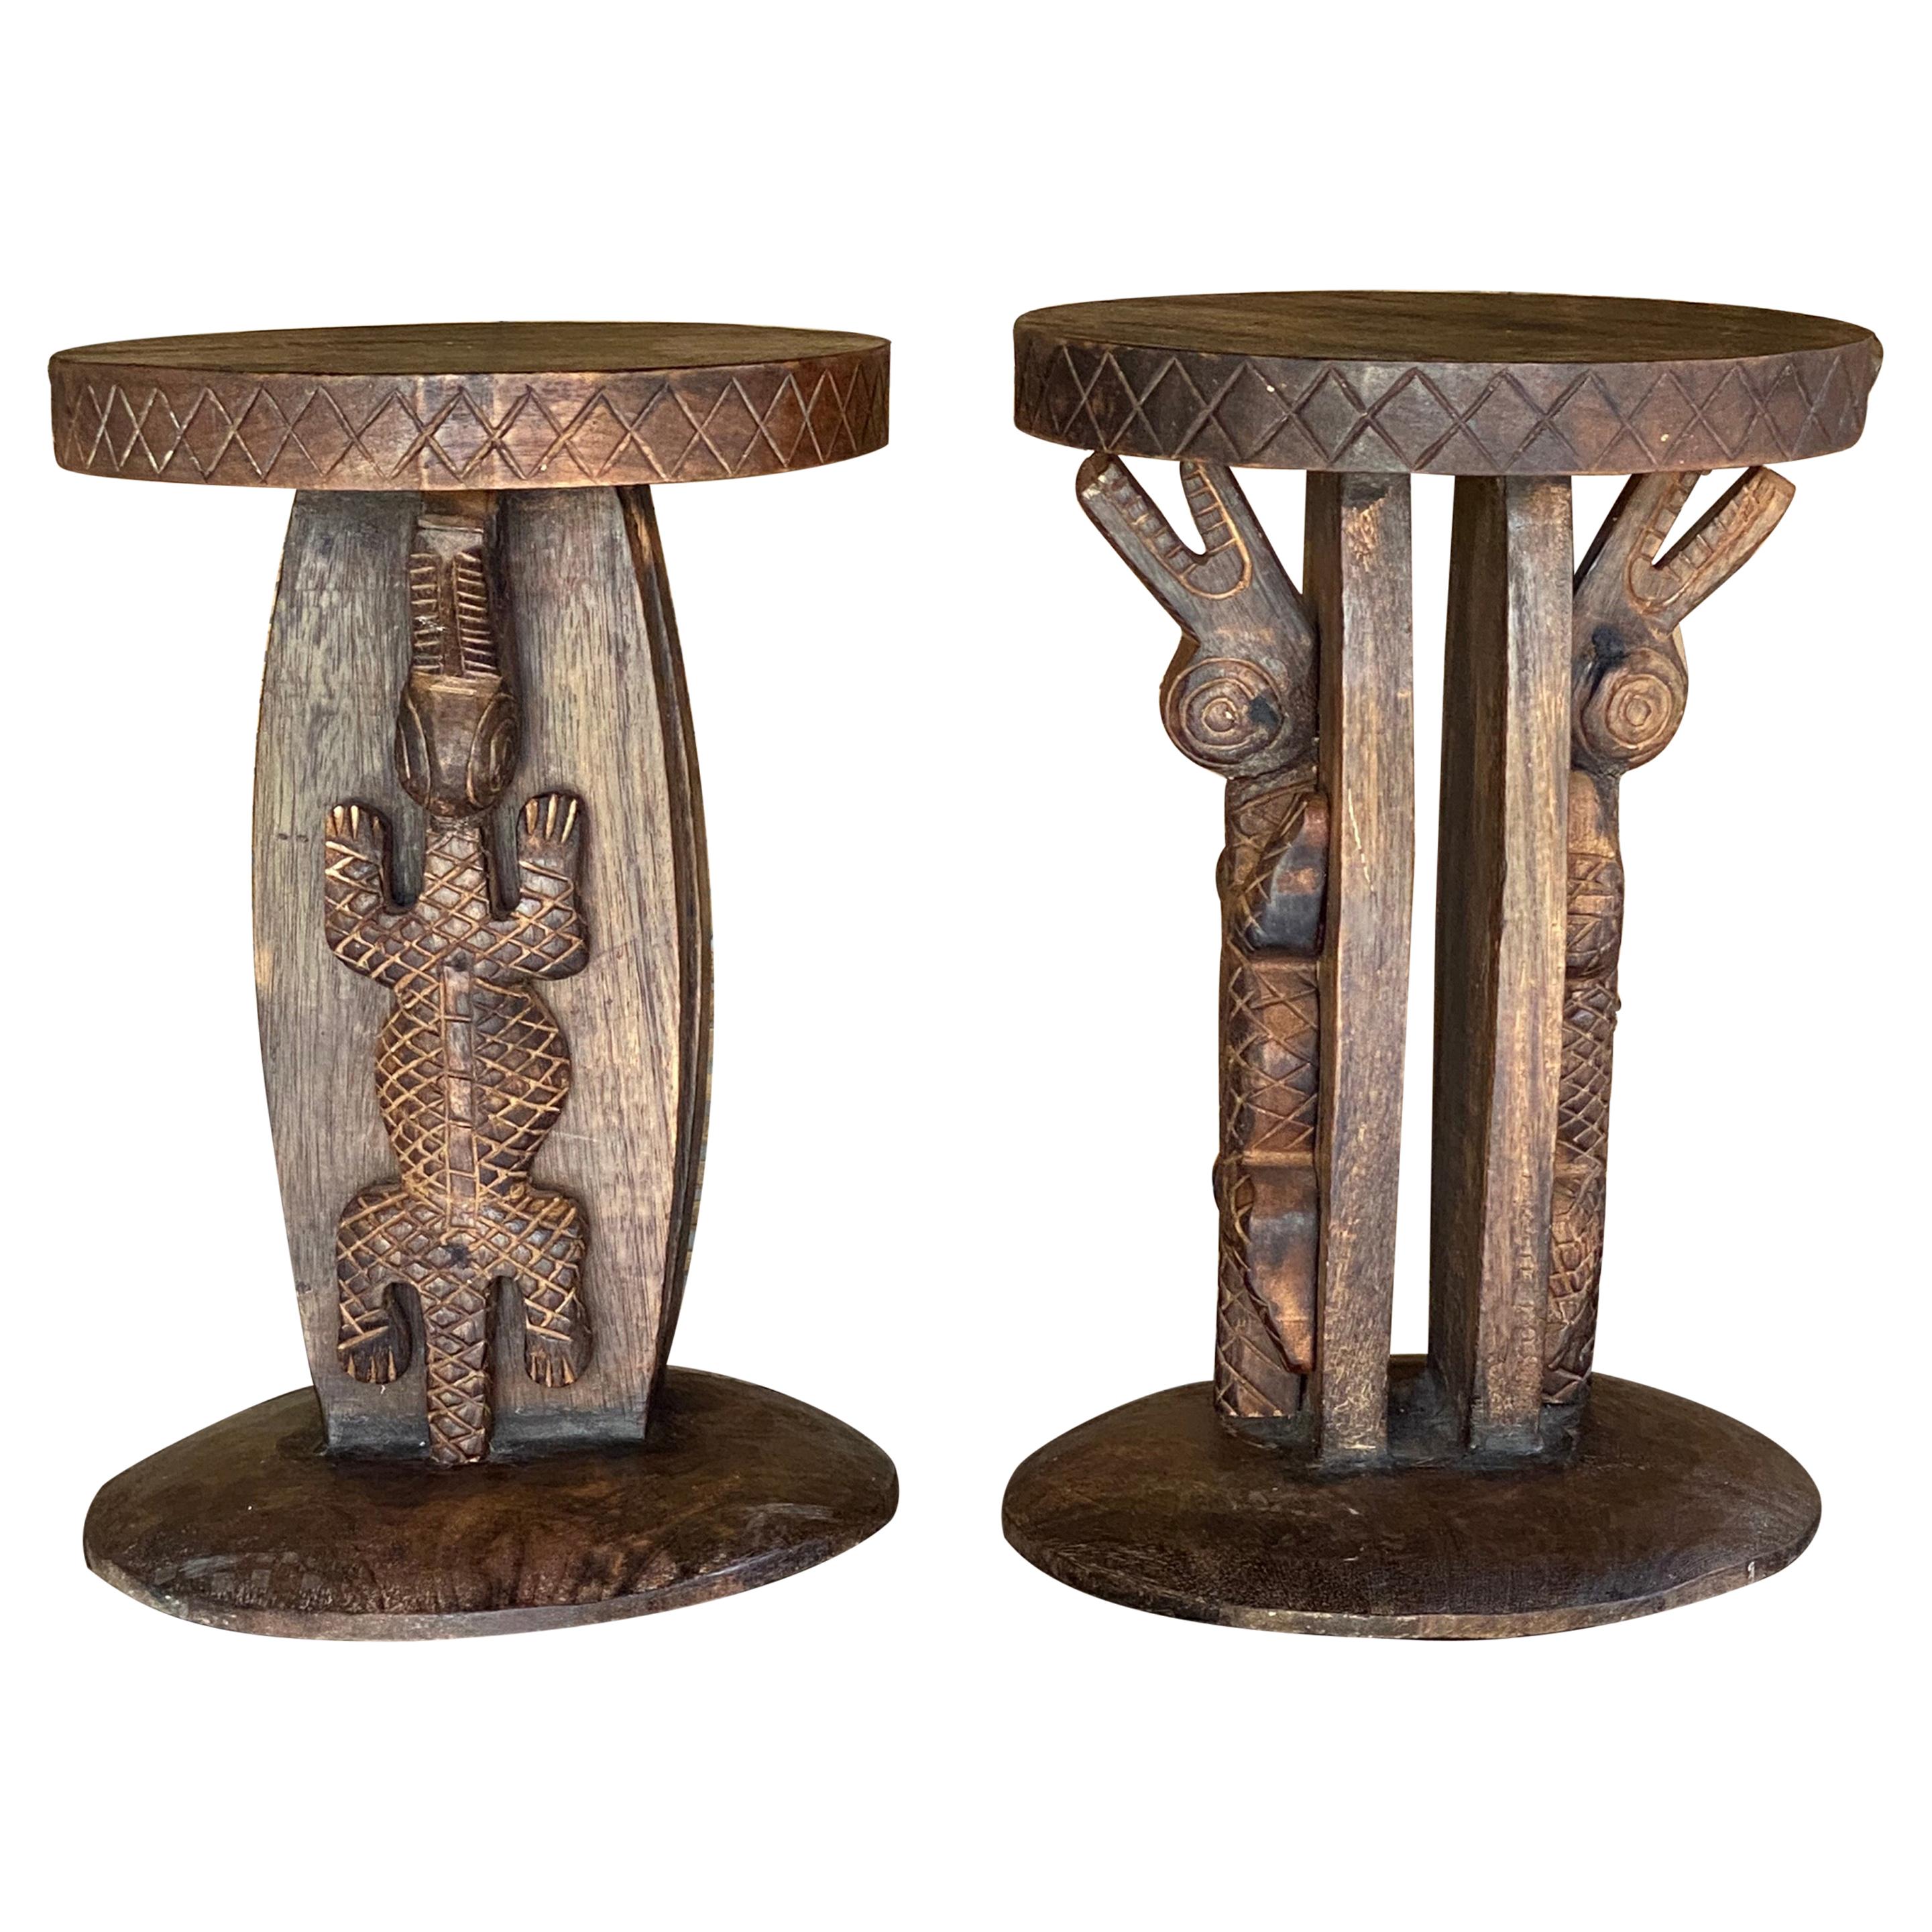 Stools in Wood with Carved Details, African Style Vintage, Set of 2